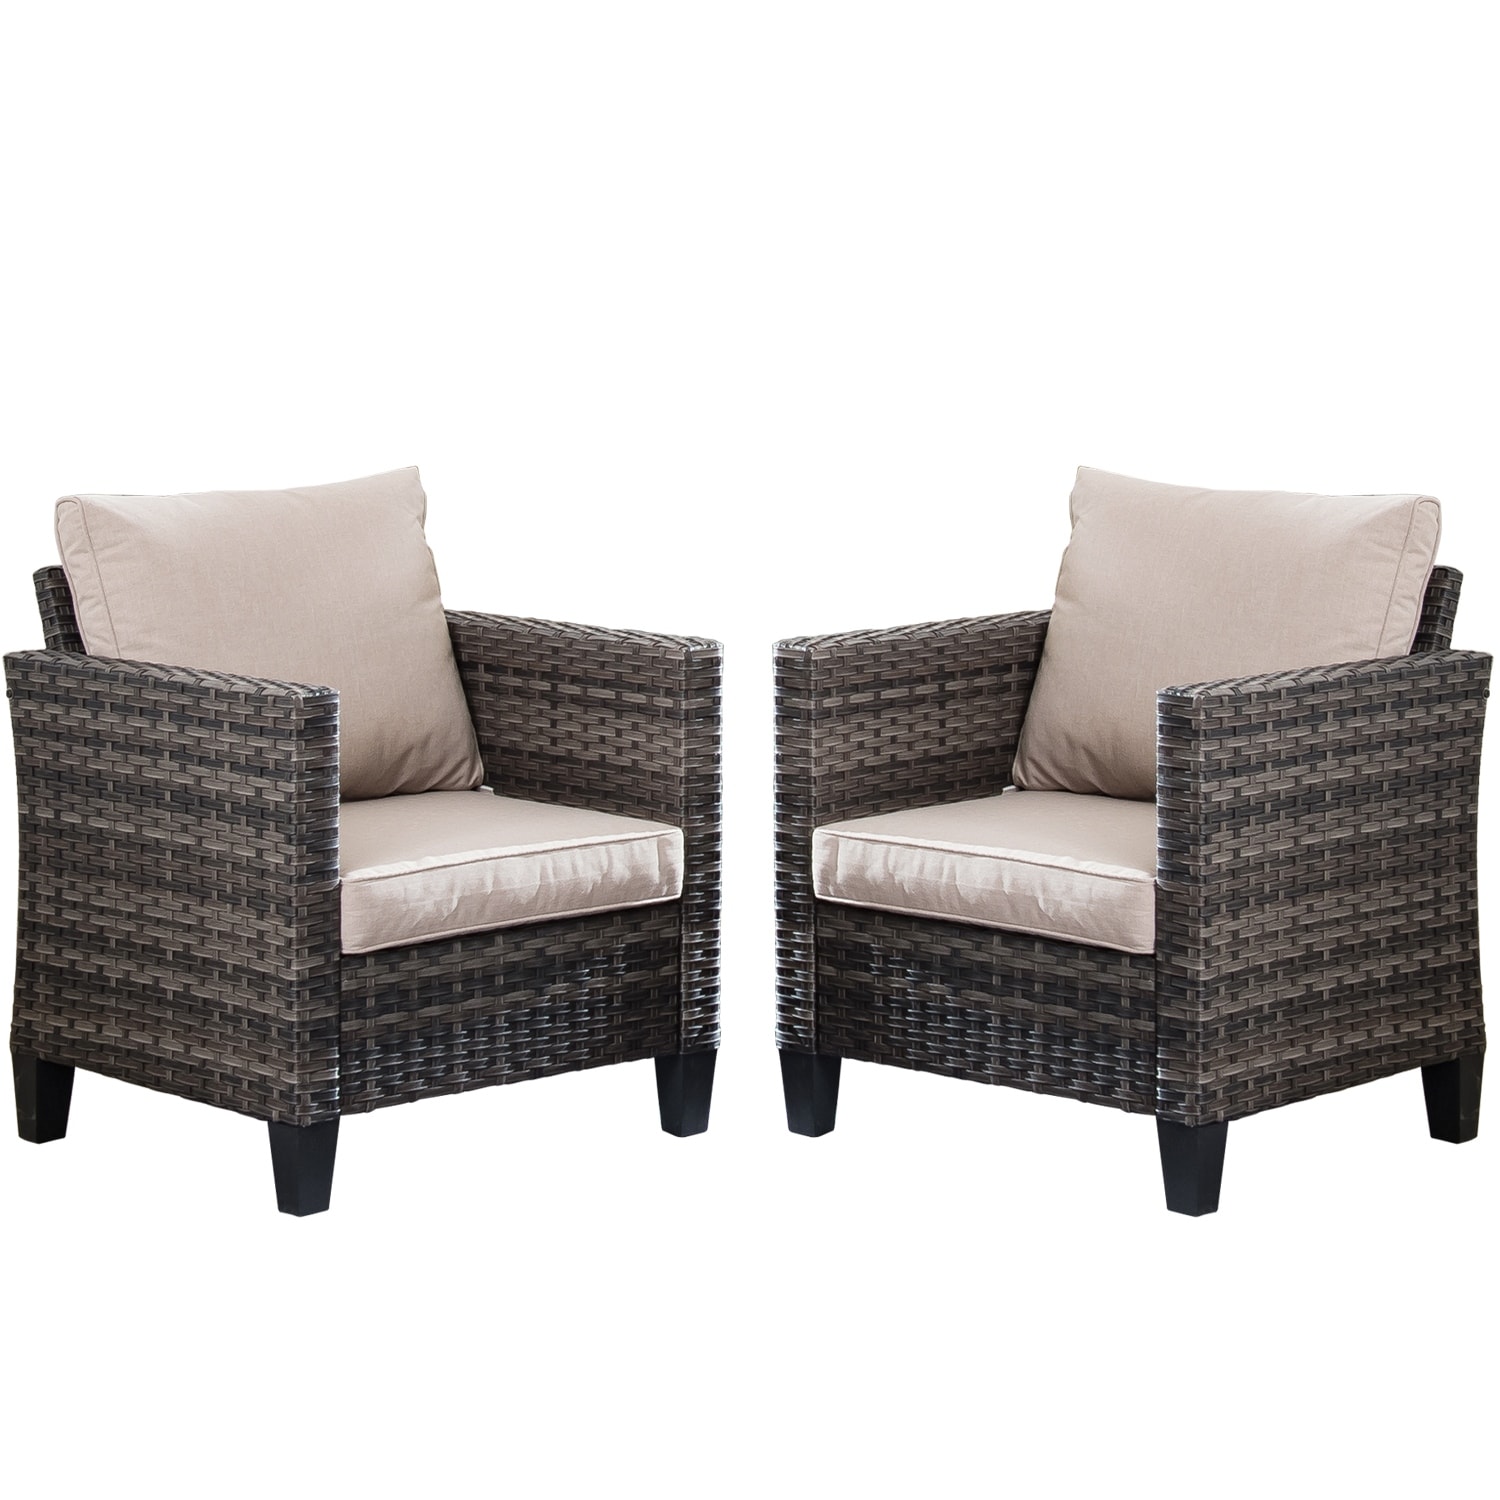 Ovios 2-piece Outdoor High-back Wicker Single Chairs